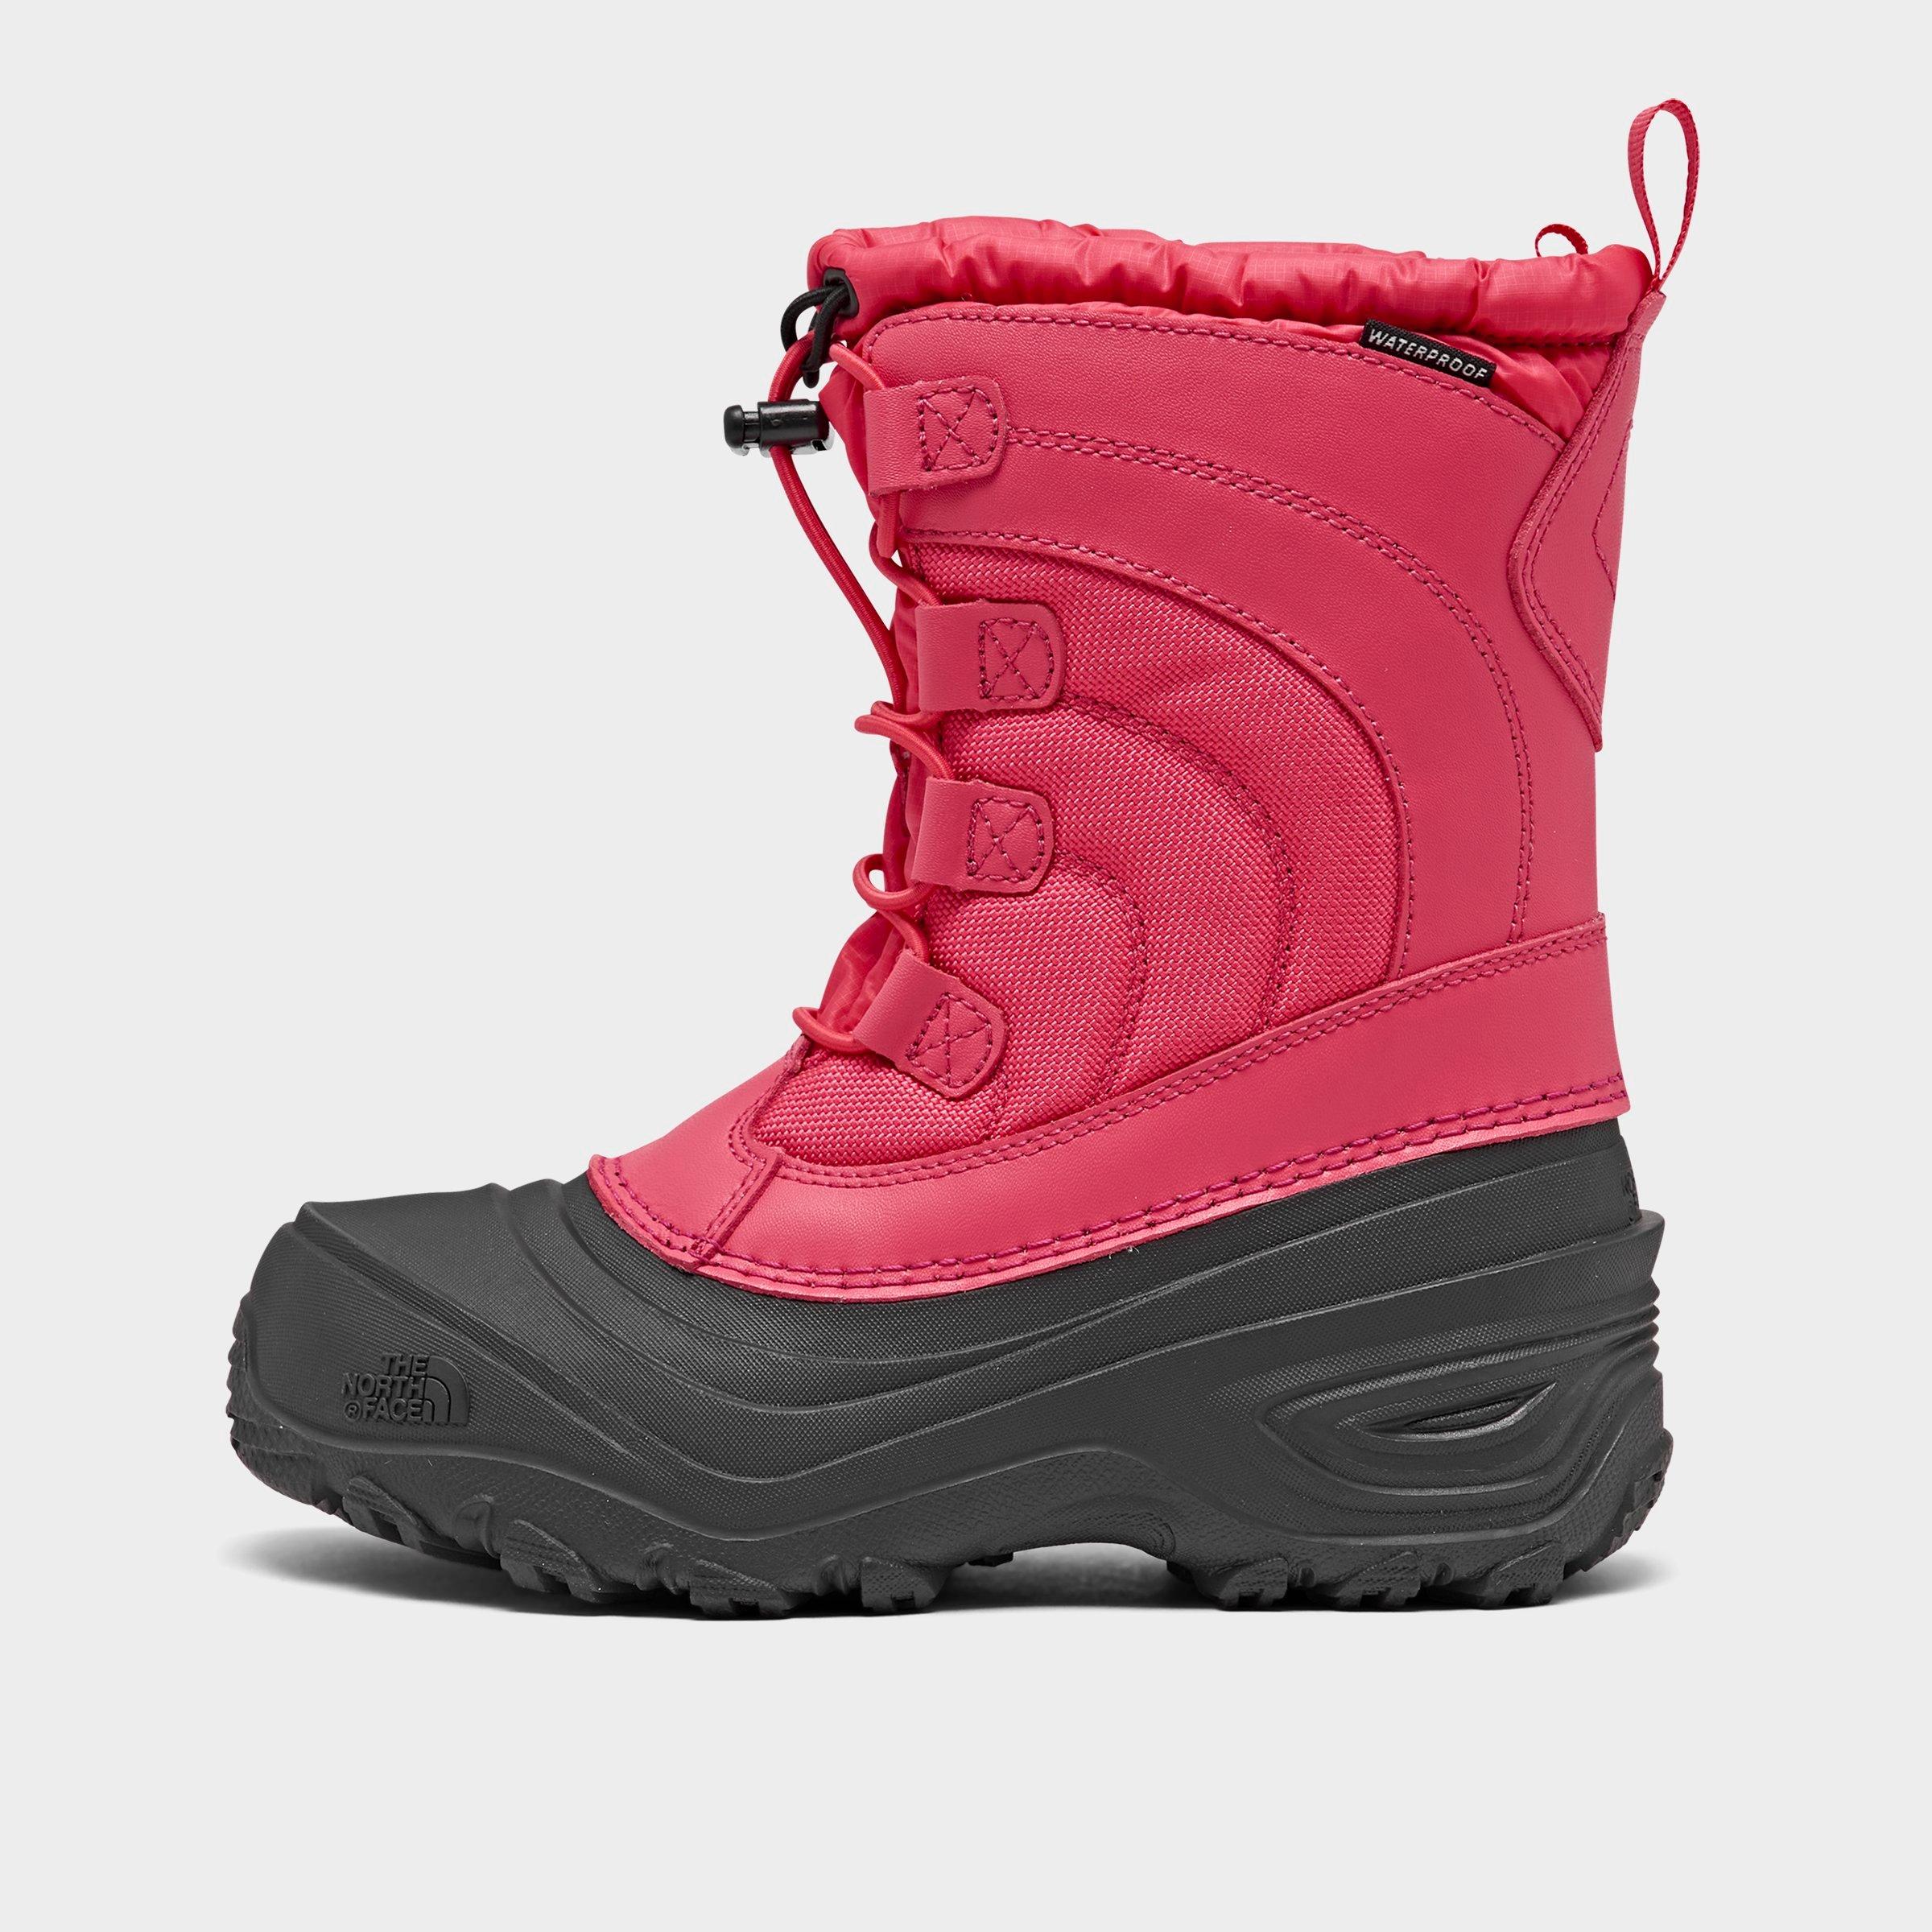 north face boots jd